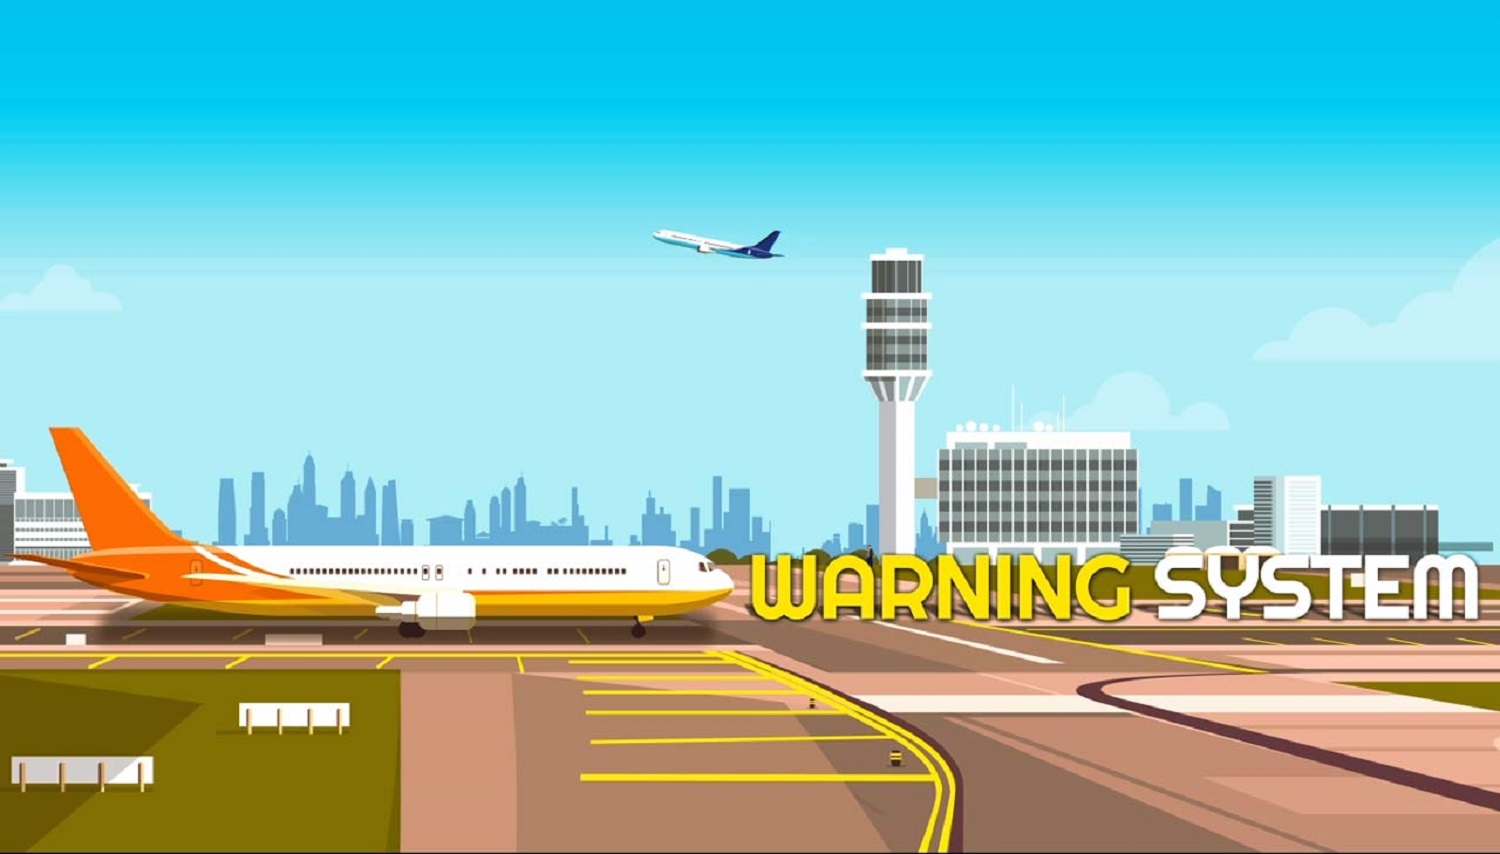 Mass warning systems for airports